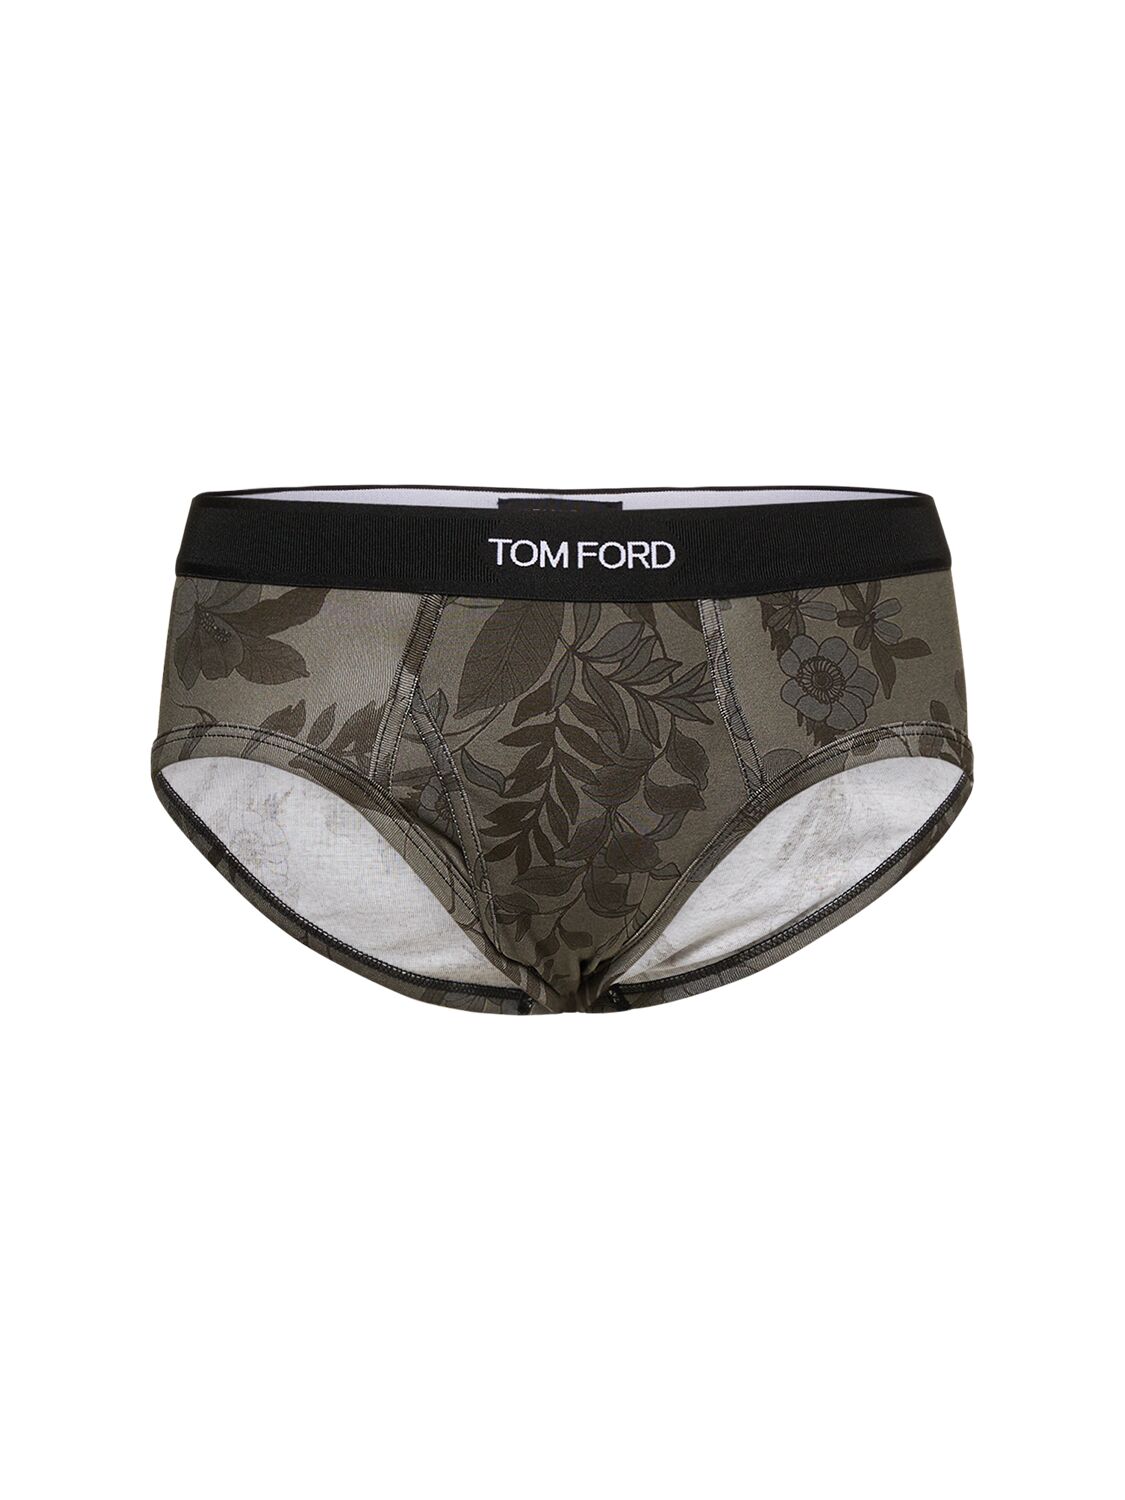 TOM FORD Floral Printed Cotton Briefs for Men